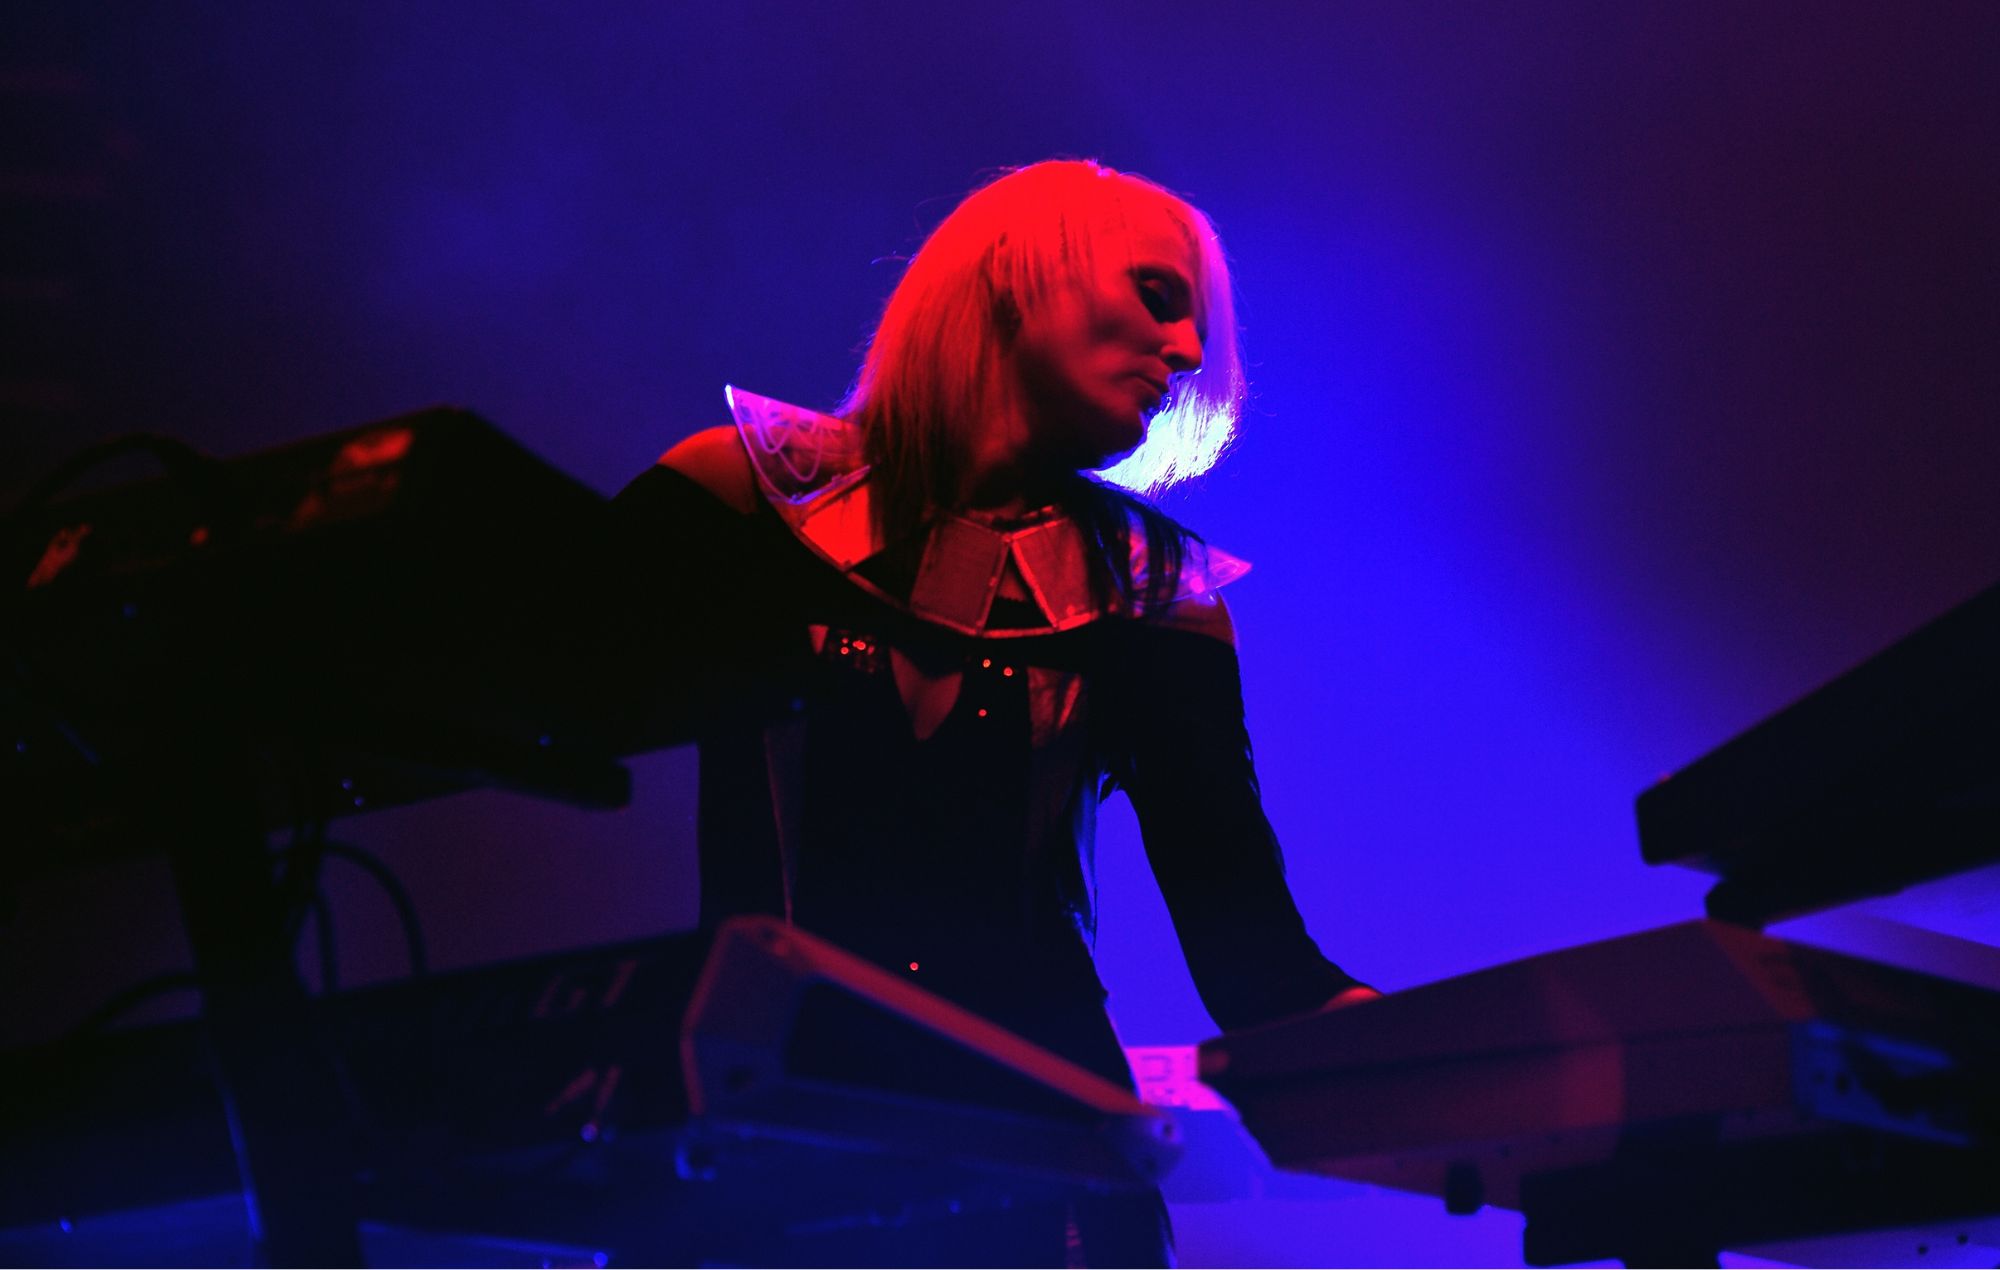 Sister Bliss of Faithless performs on stage at the O2 Academy Brixton on August 18, 2016 in London, England.